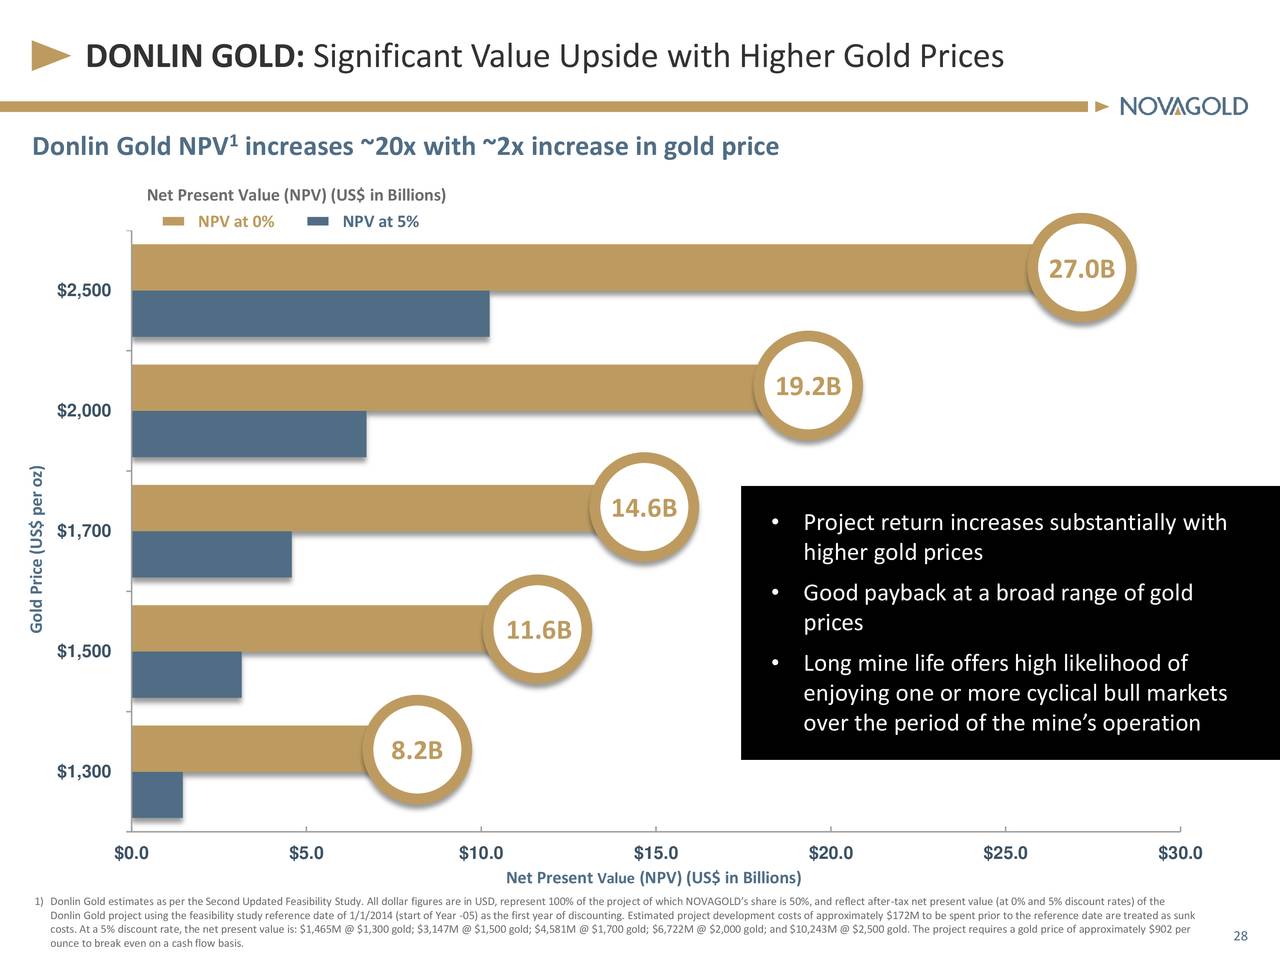 DONLIN GOLD: Significant Value Upside with Higher Gold Prices